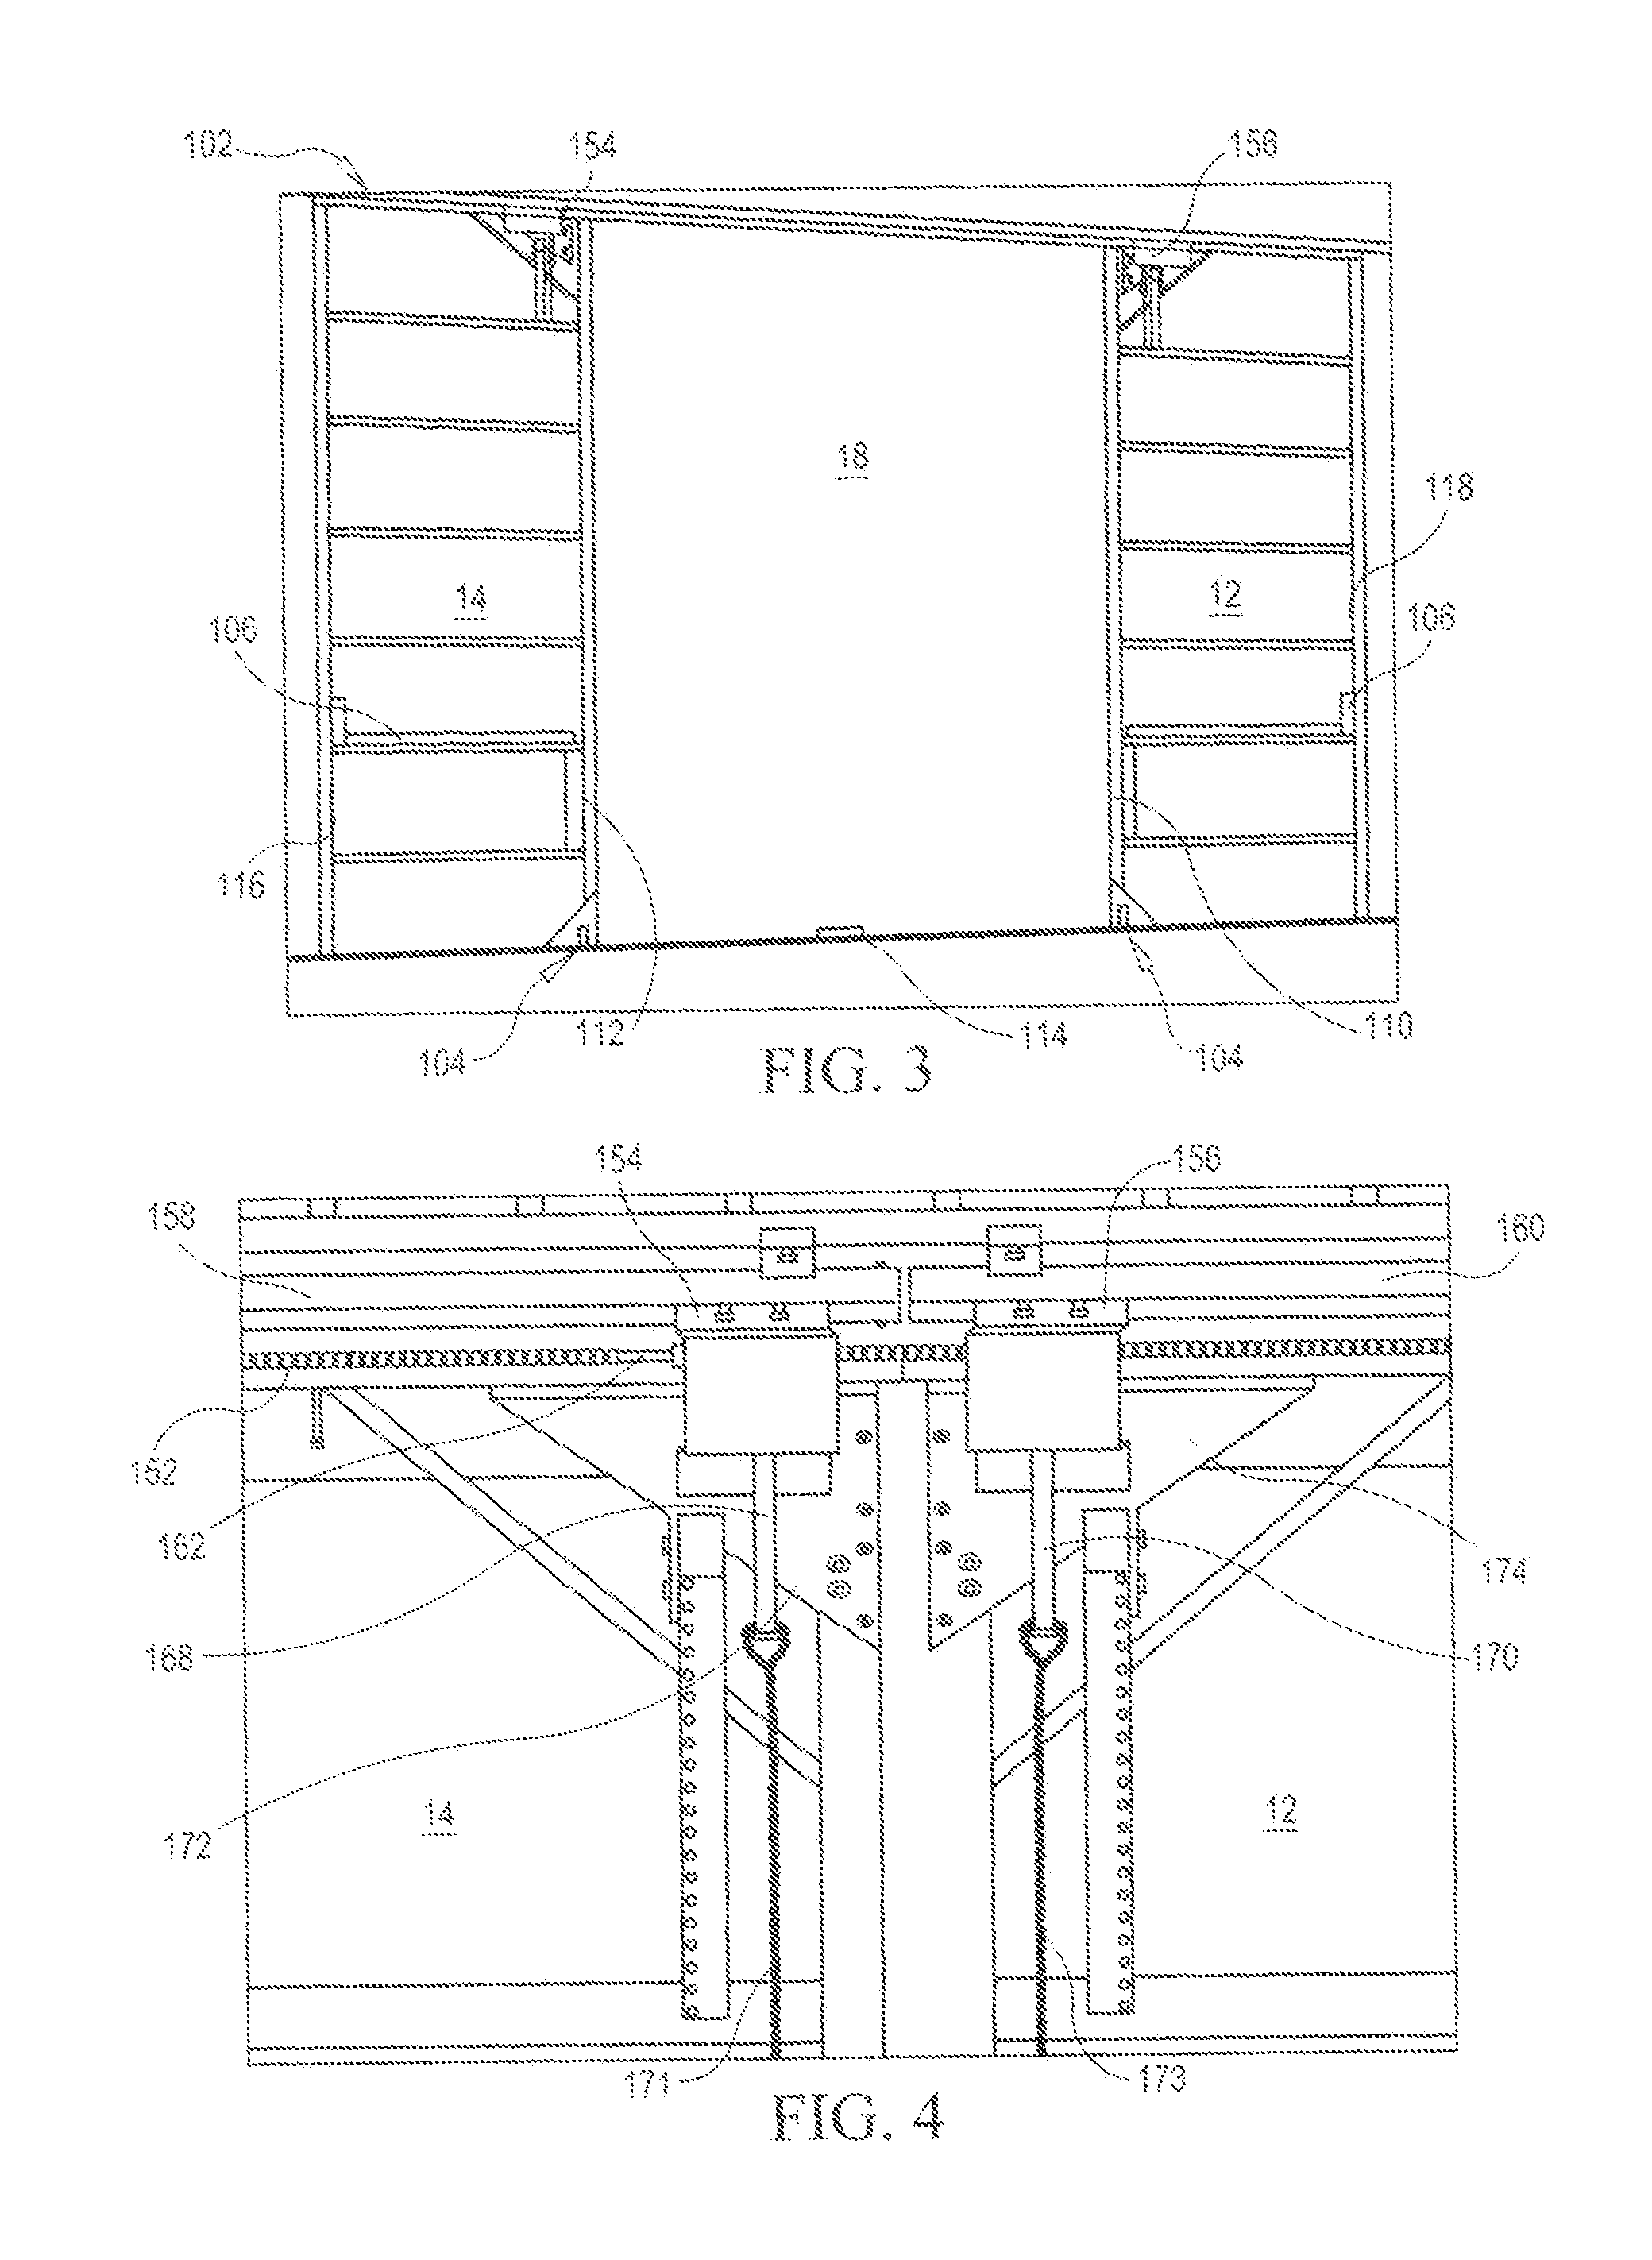 Automatic sliding door systems, apparatus and methods